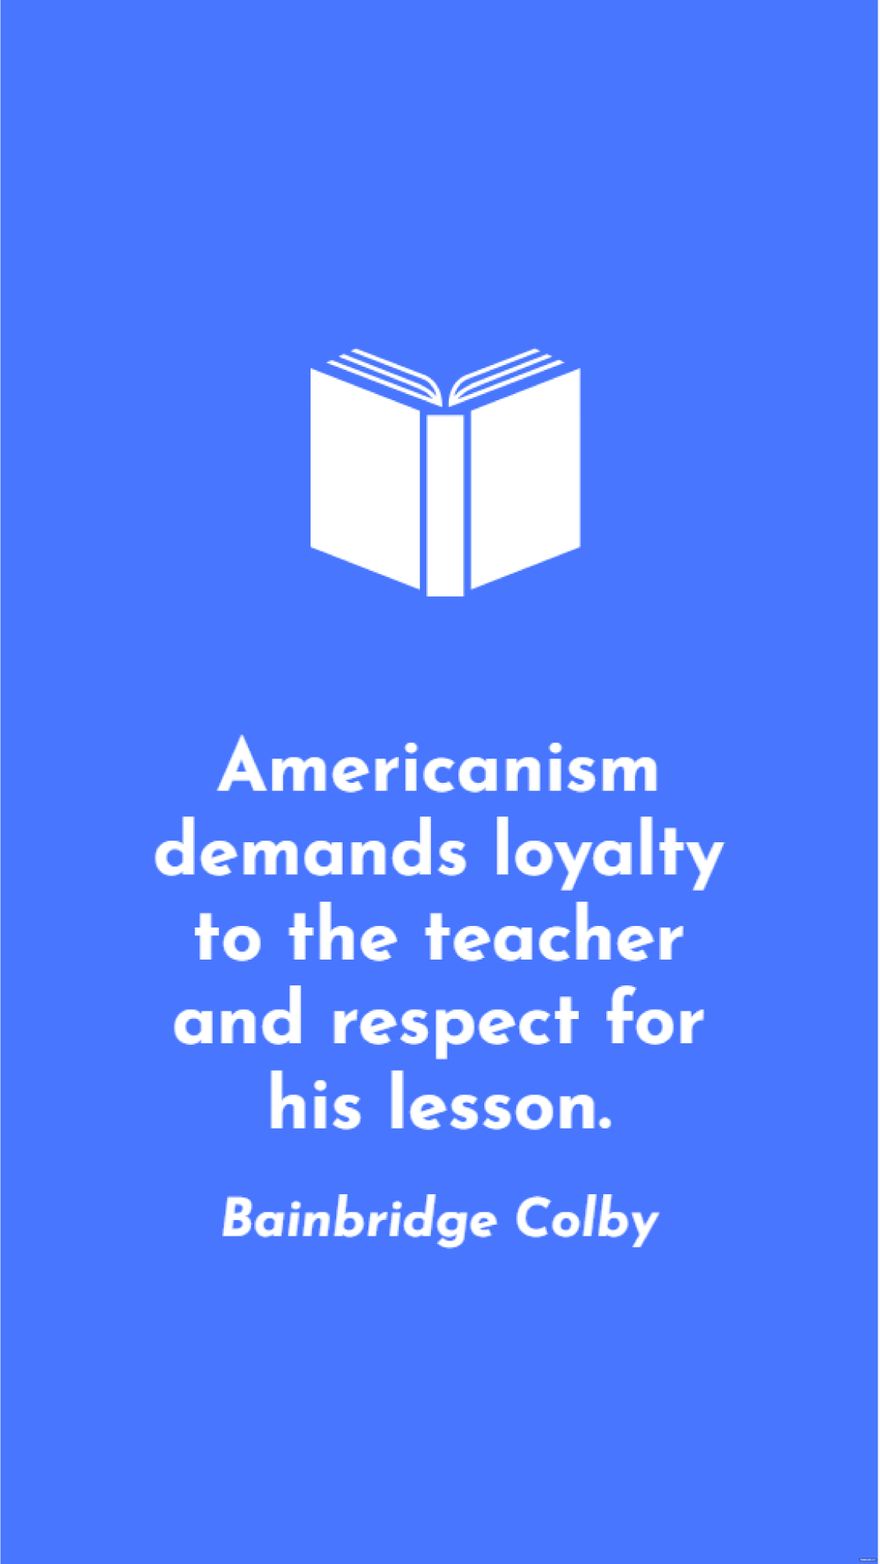 Free Bainbridge Colby - Americanism demands loyalty to the teacher and respect for his lesson. in JPG